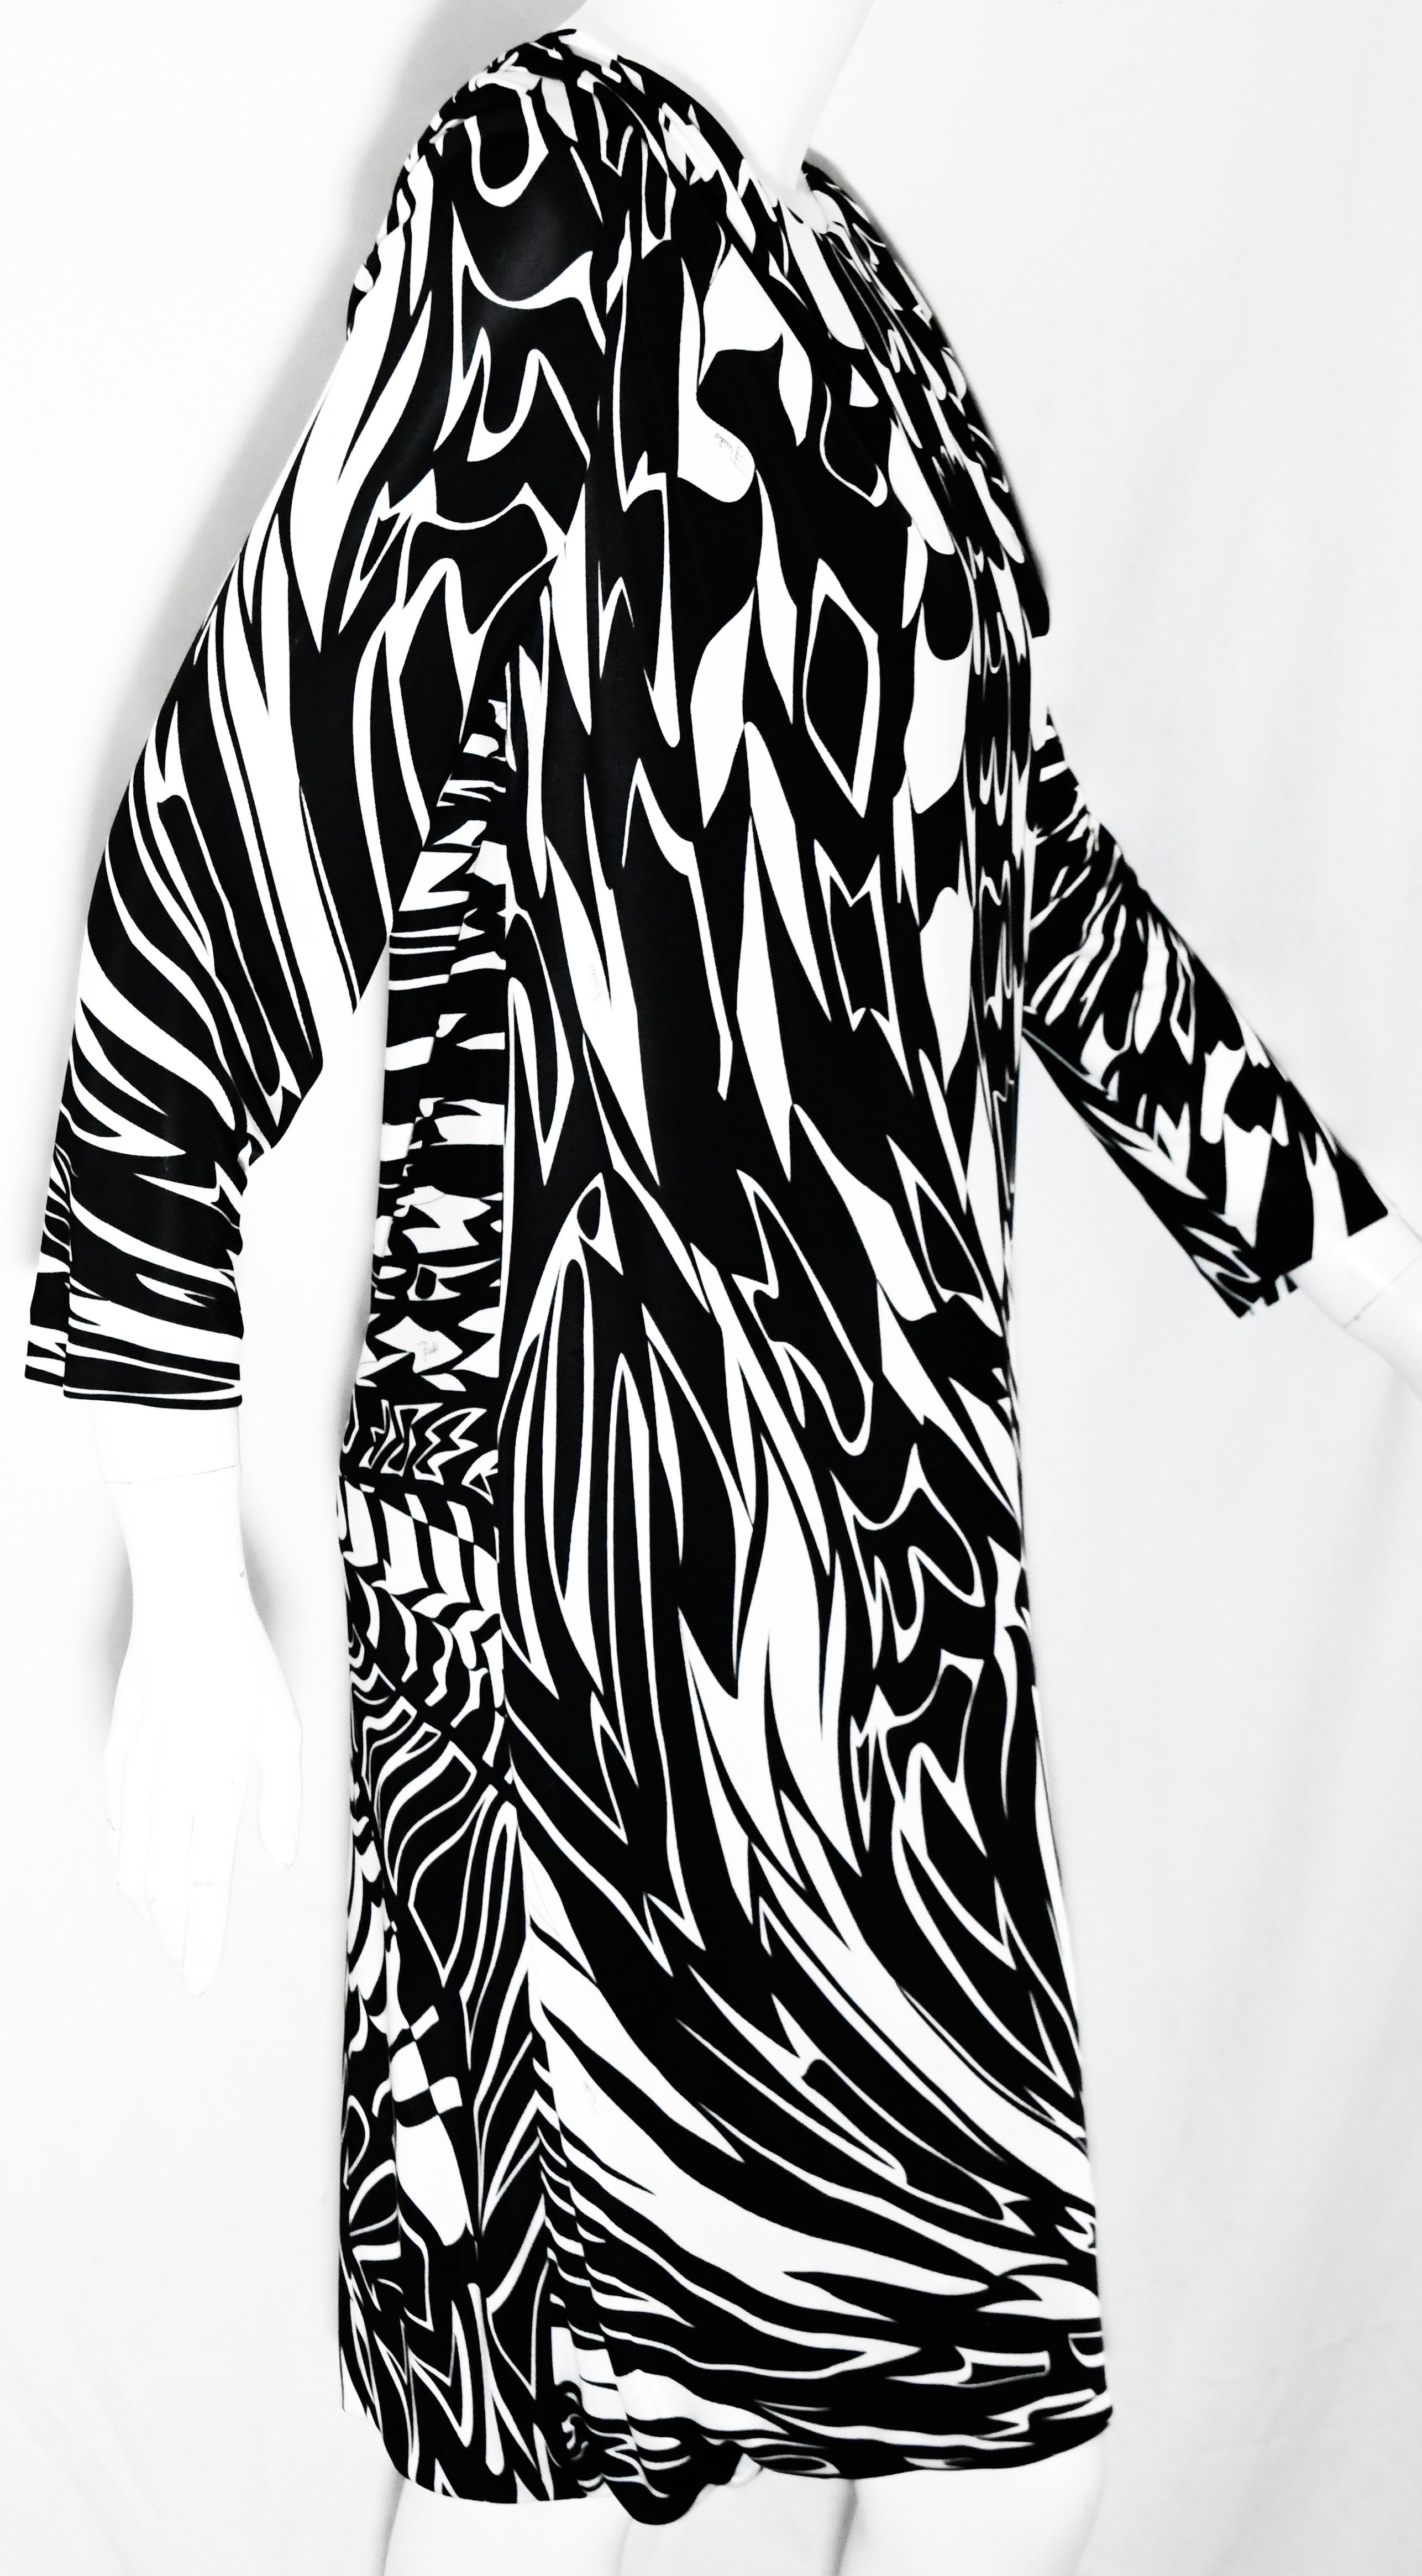 Emilio Pucci black and white abstract design dress with 3/4 length sleeves is accentuated with mini pleats on shoulders.  The total look at Emilio Pucci is  inspired by Victor Vasarely’s kinetic art designs at the 2016 Collection.  This shift dress